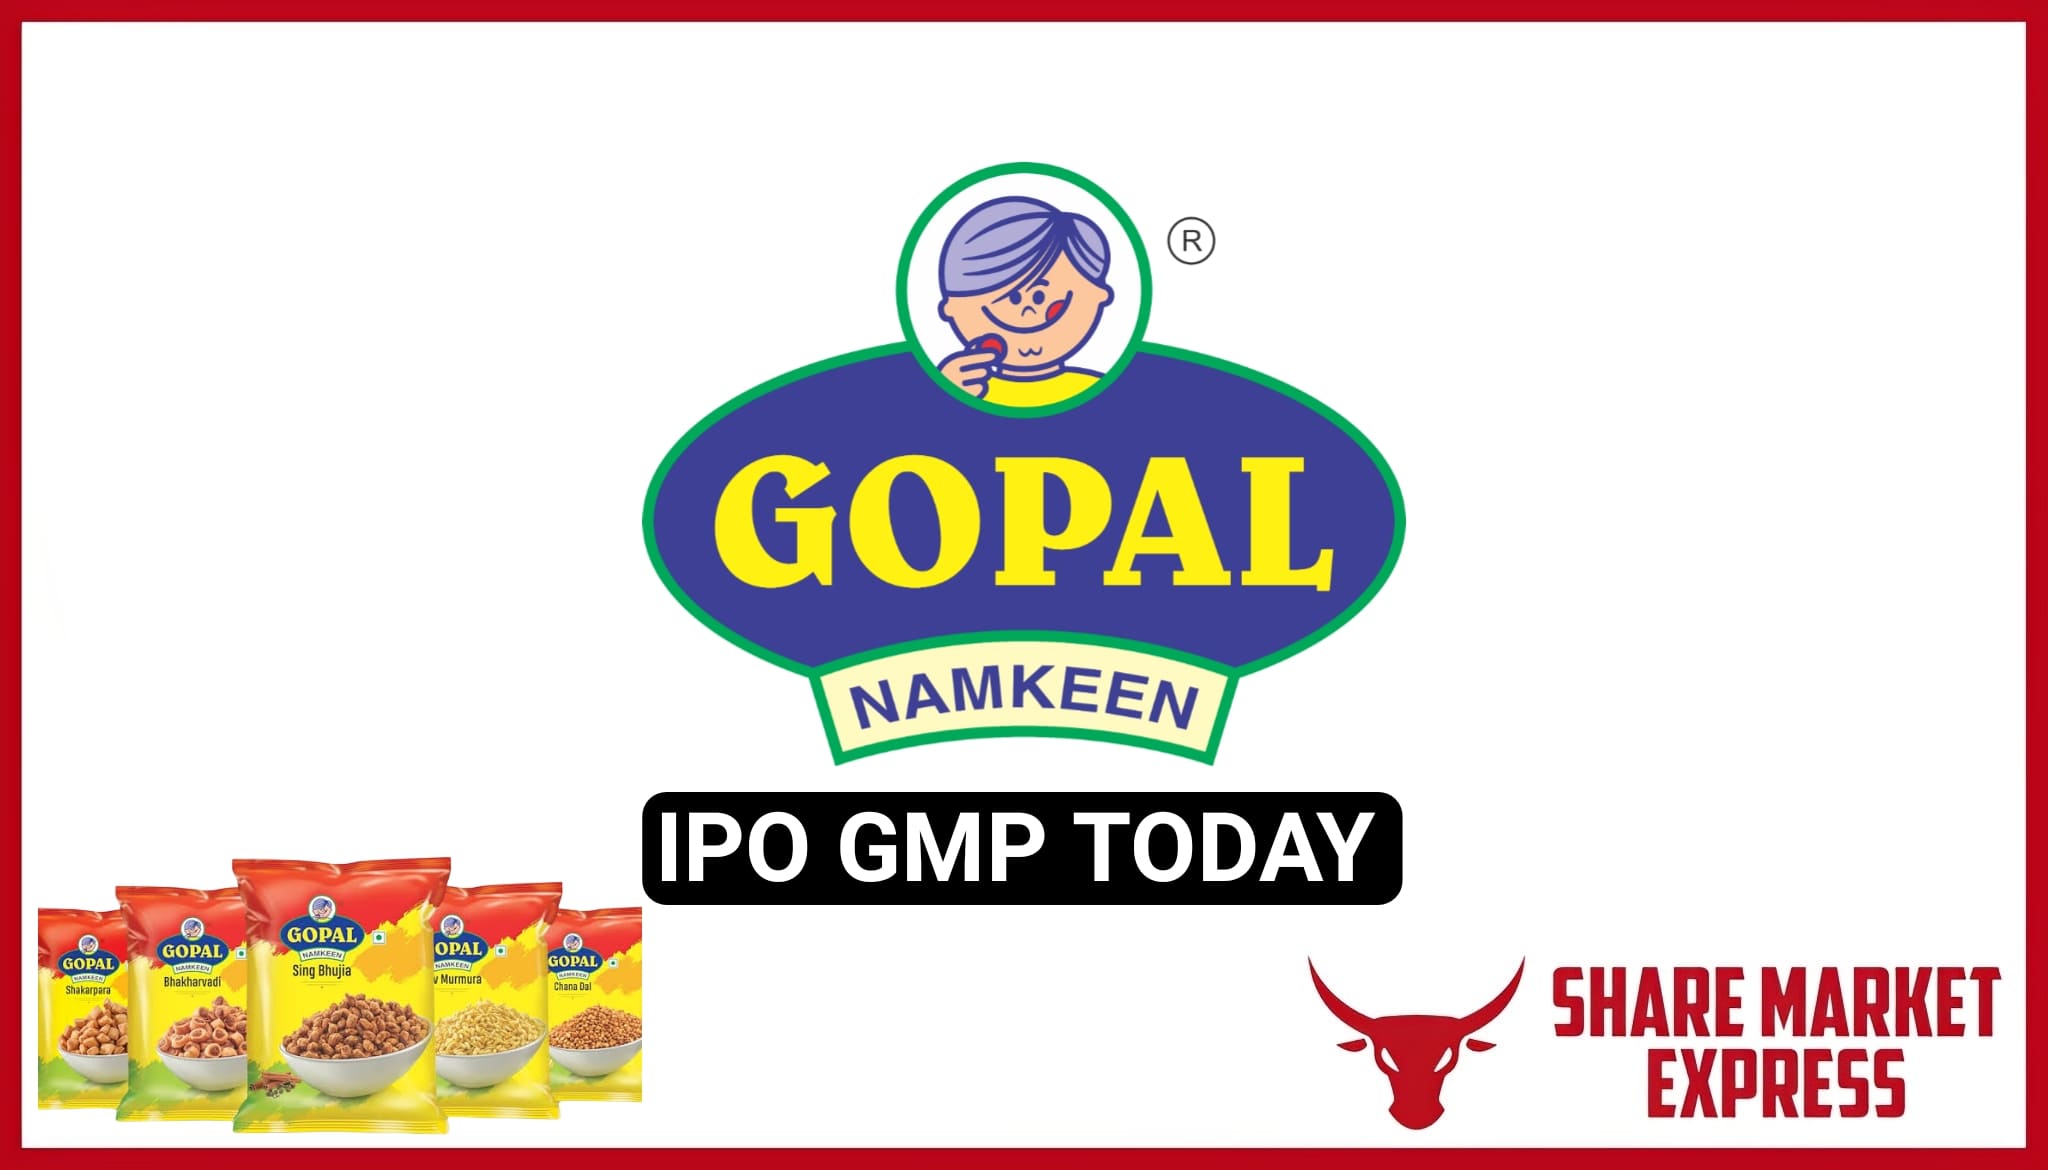 Gopal Snacks IPO GMP Today - Gopal Namkeen IPO GMP Today